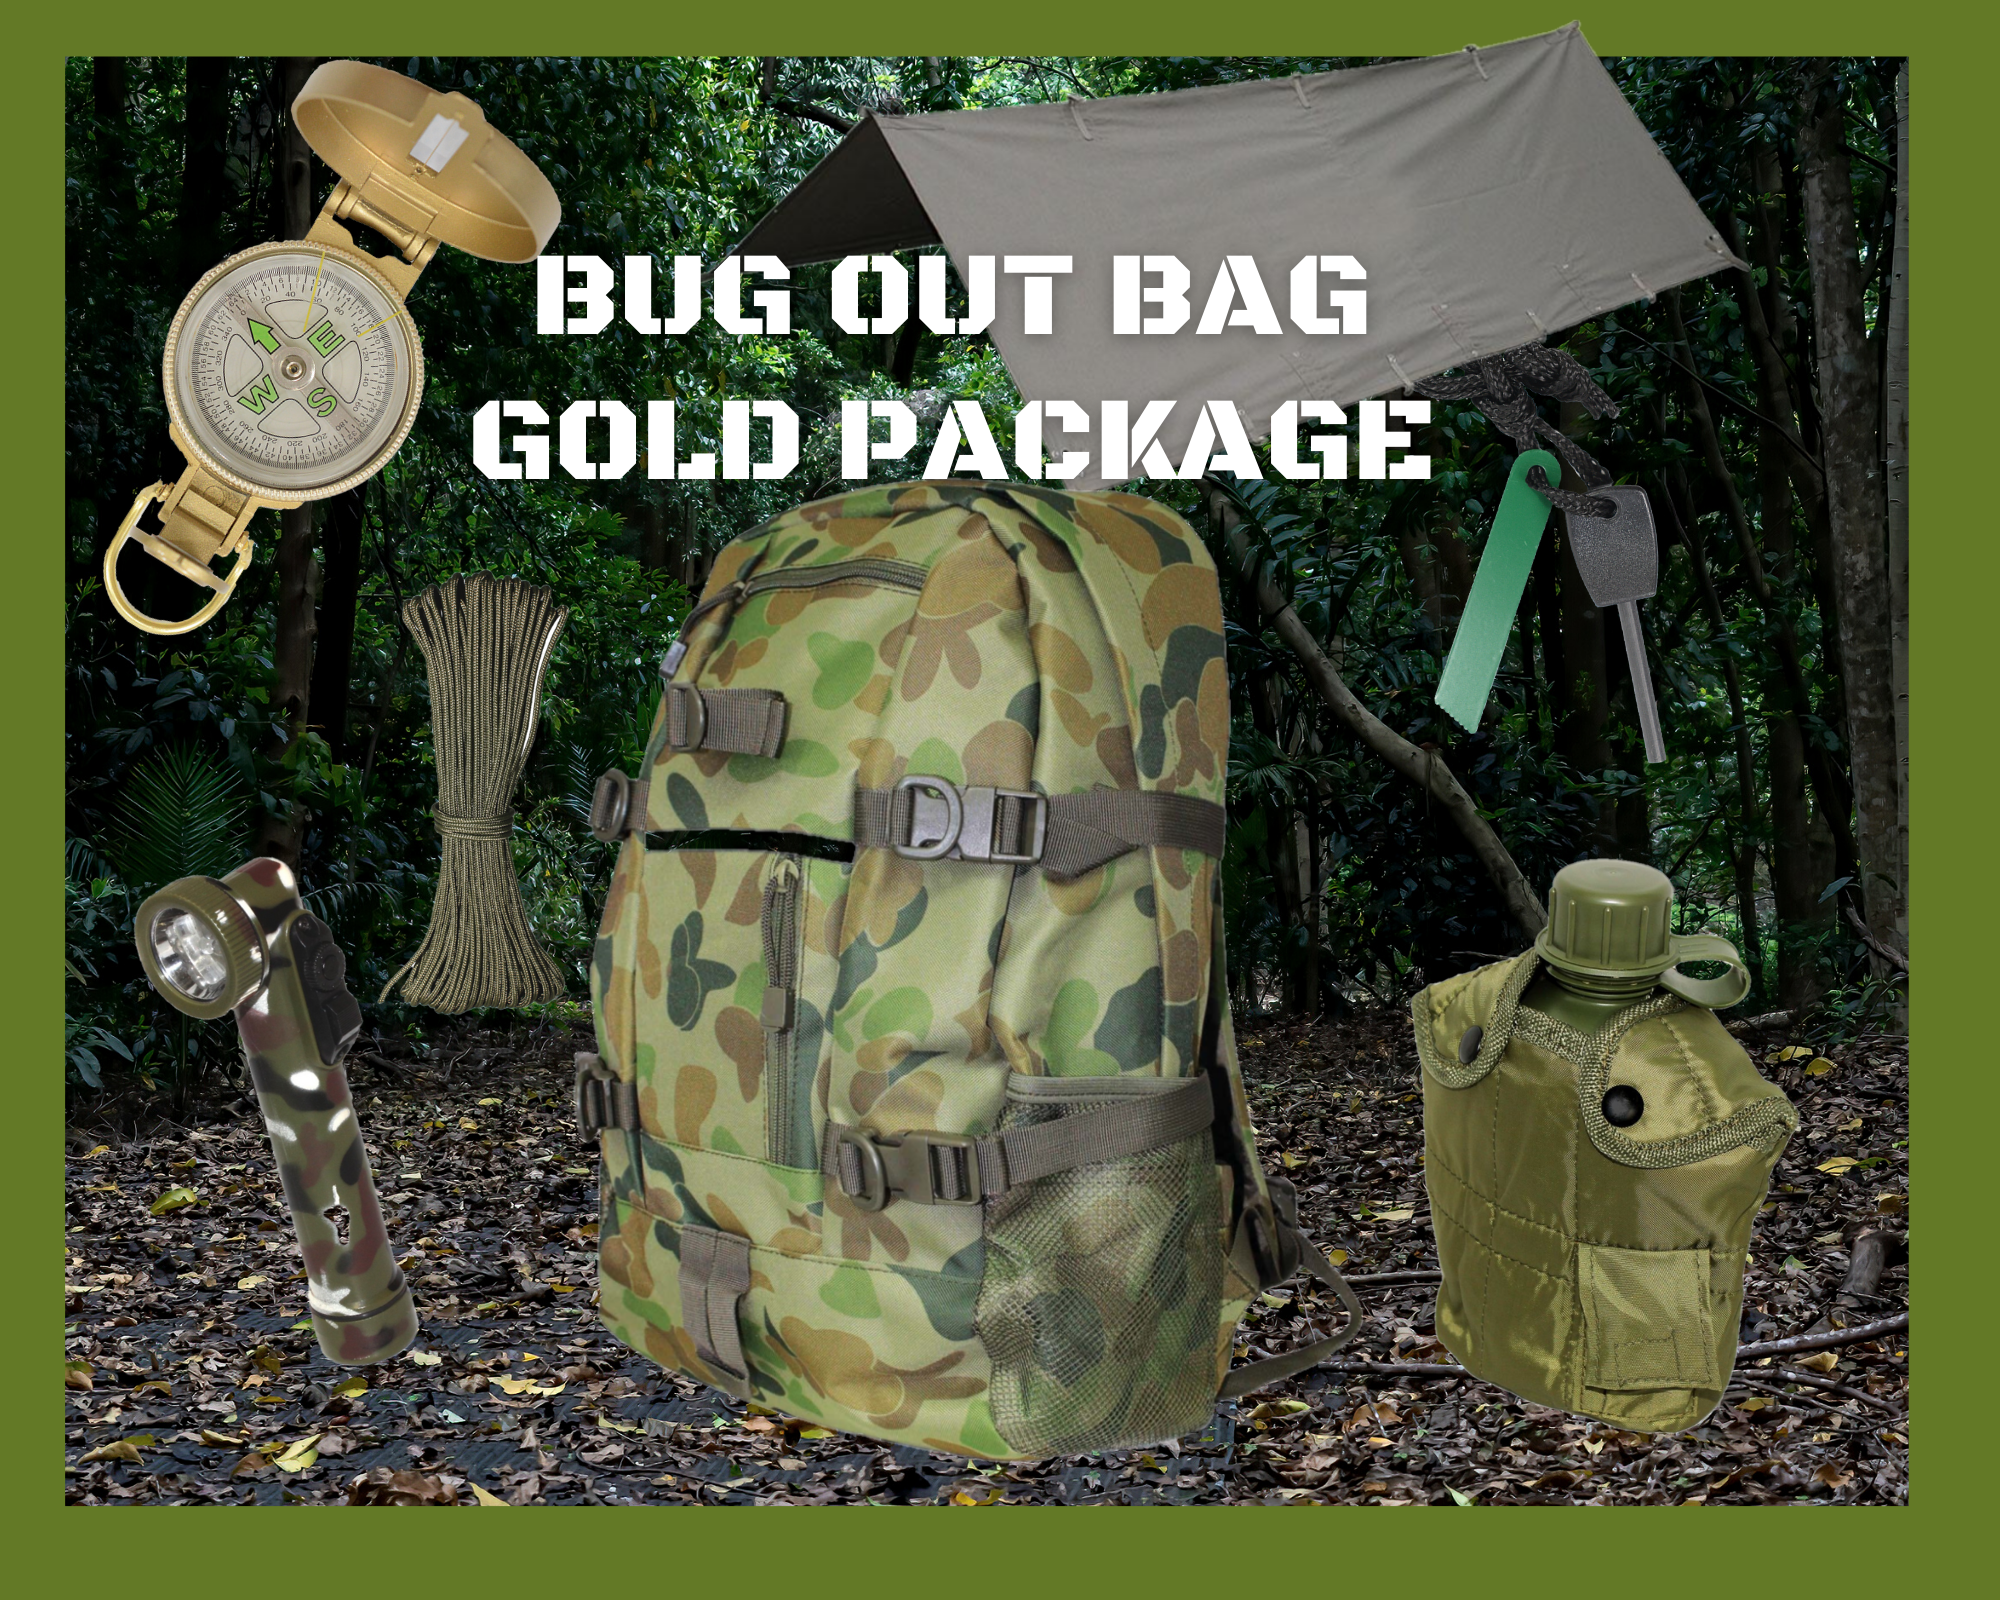 Bug Out Bag Gold Package, Grab Bag, Preppers Bag – The Outdoor